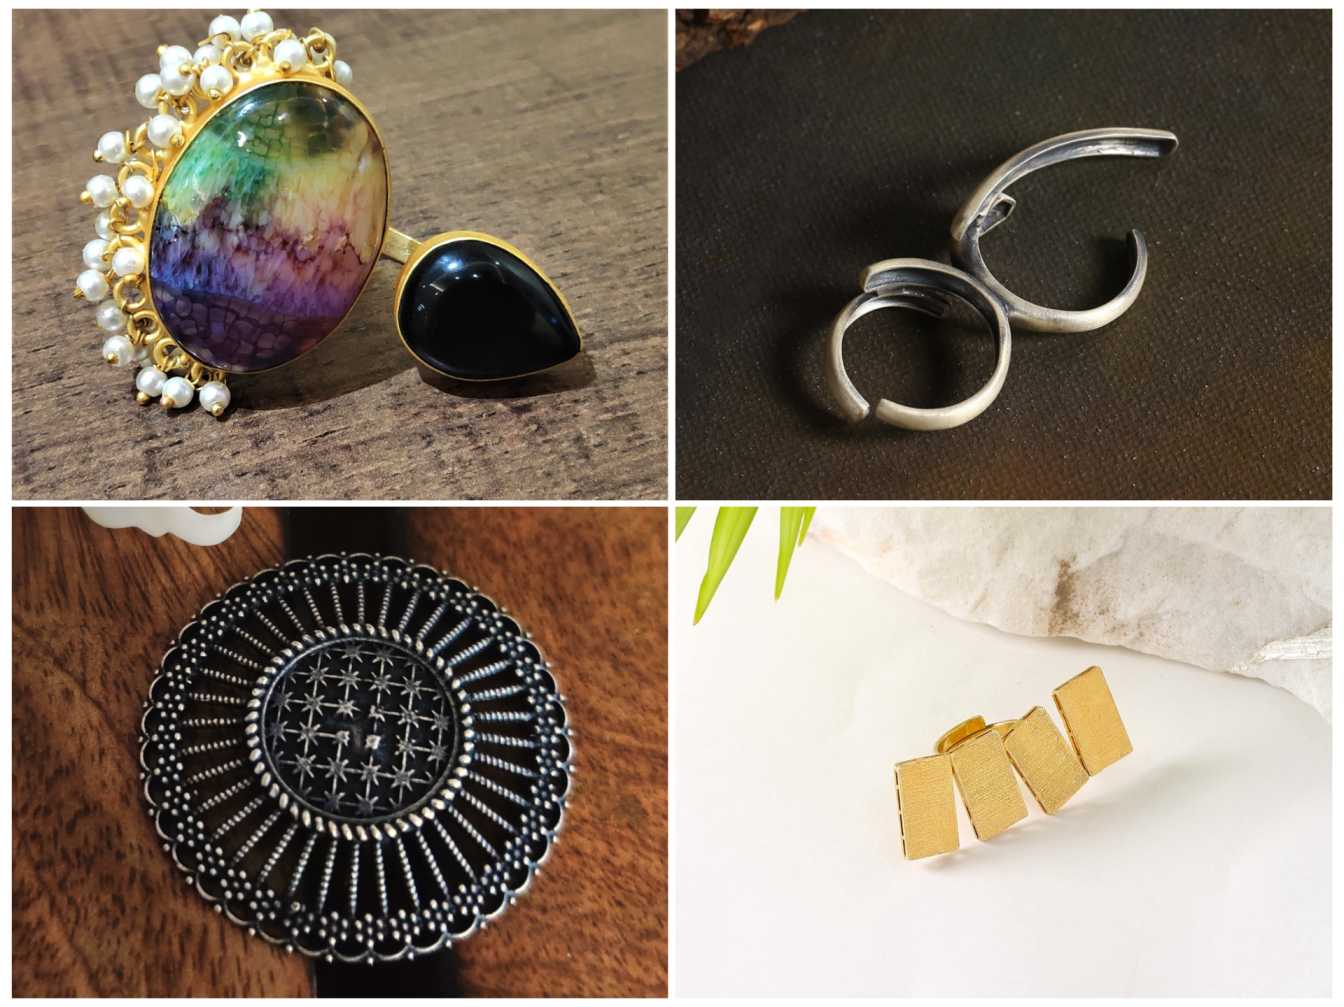 Explore these ladies earrings, necklaces, rings, toe rings and the rest of our artistic jewelry selection